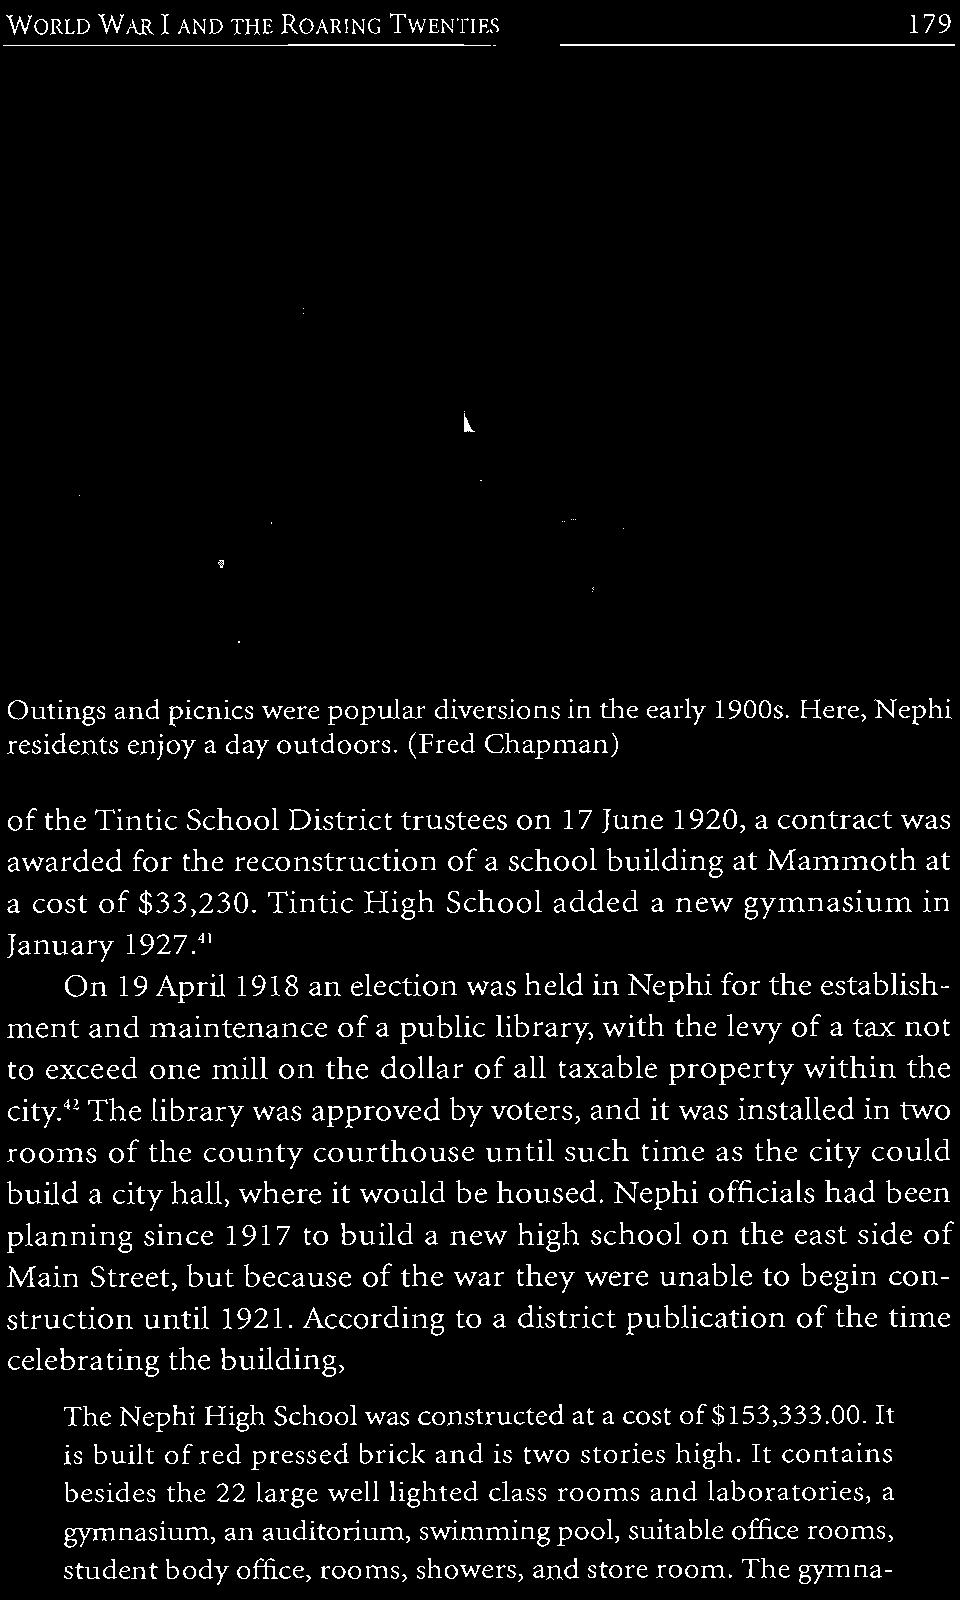 Tintic High School added a new gymnasium in January 1927.